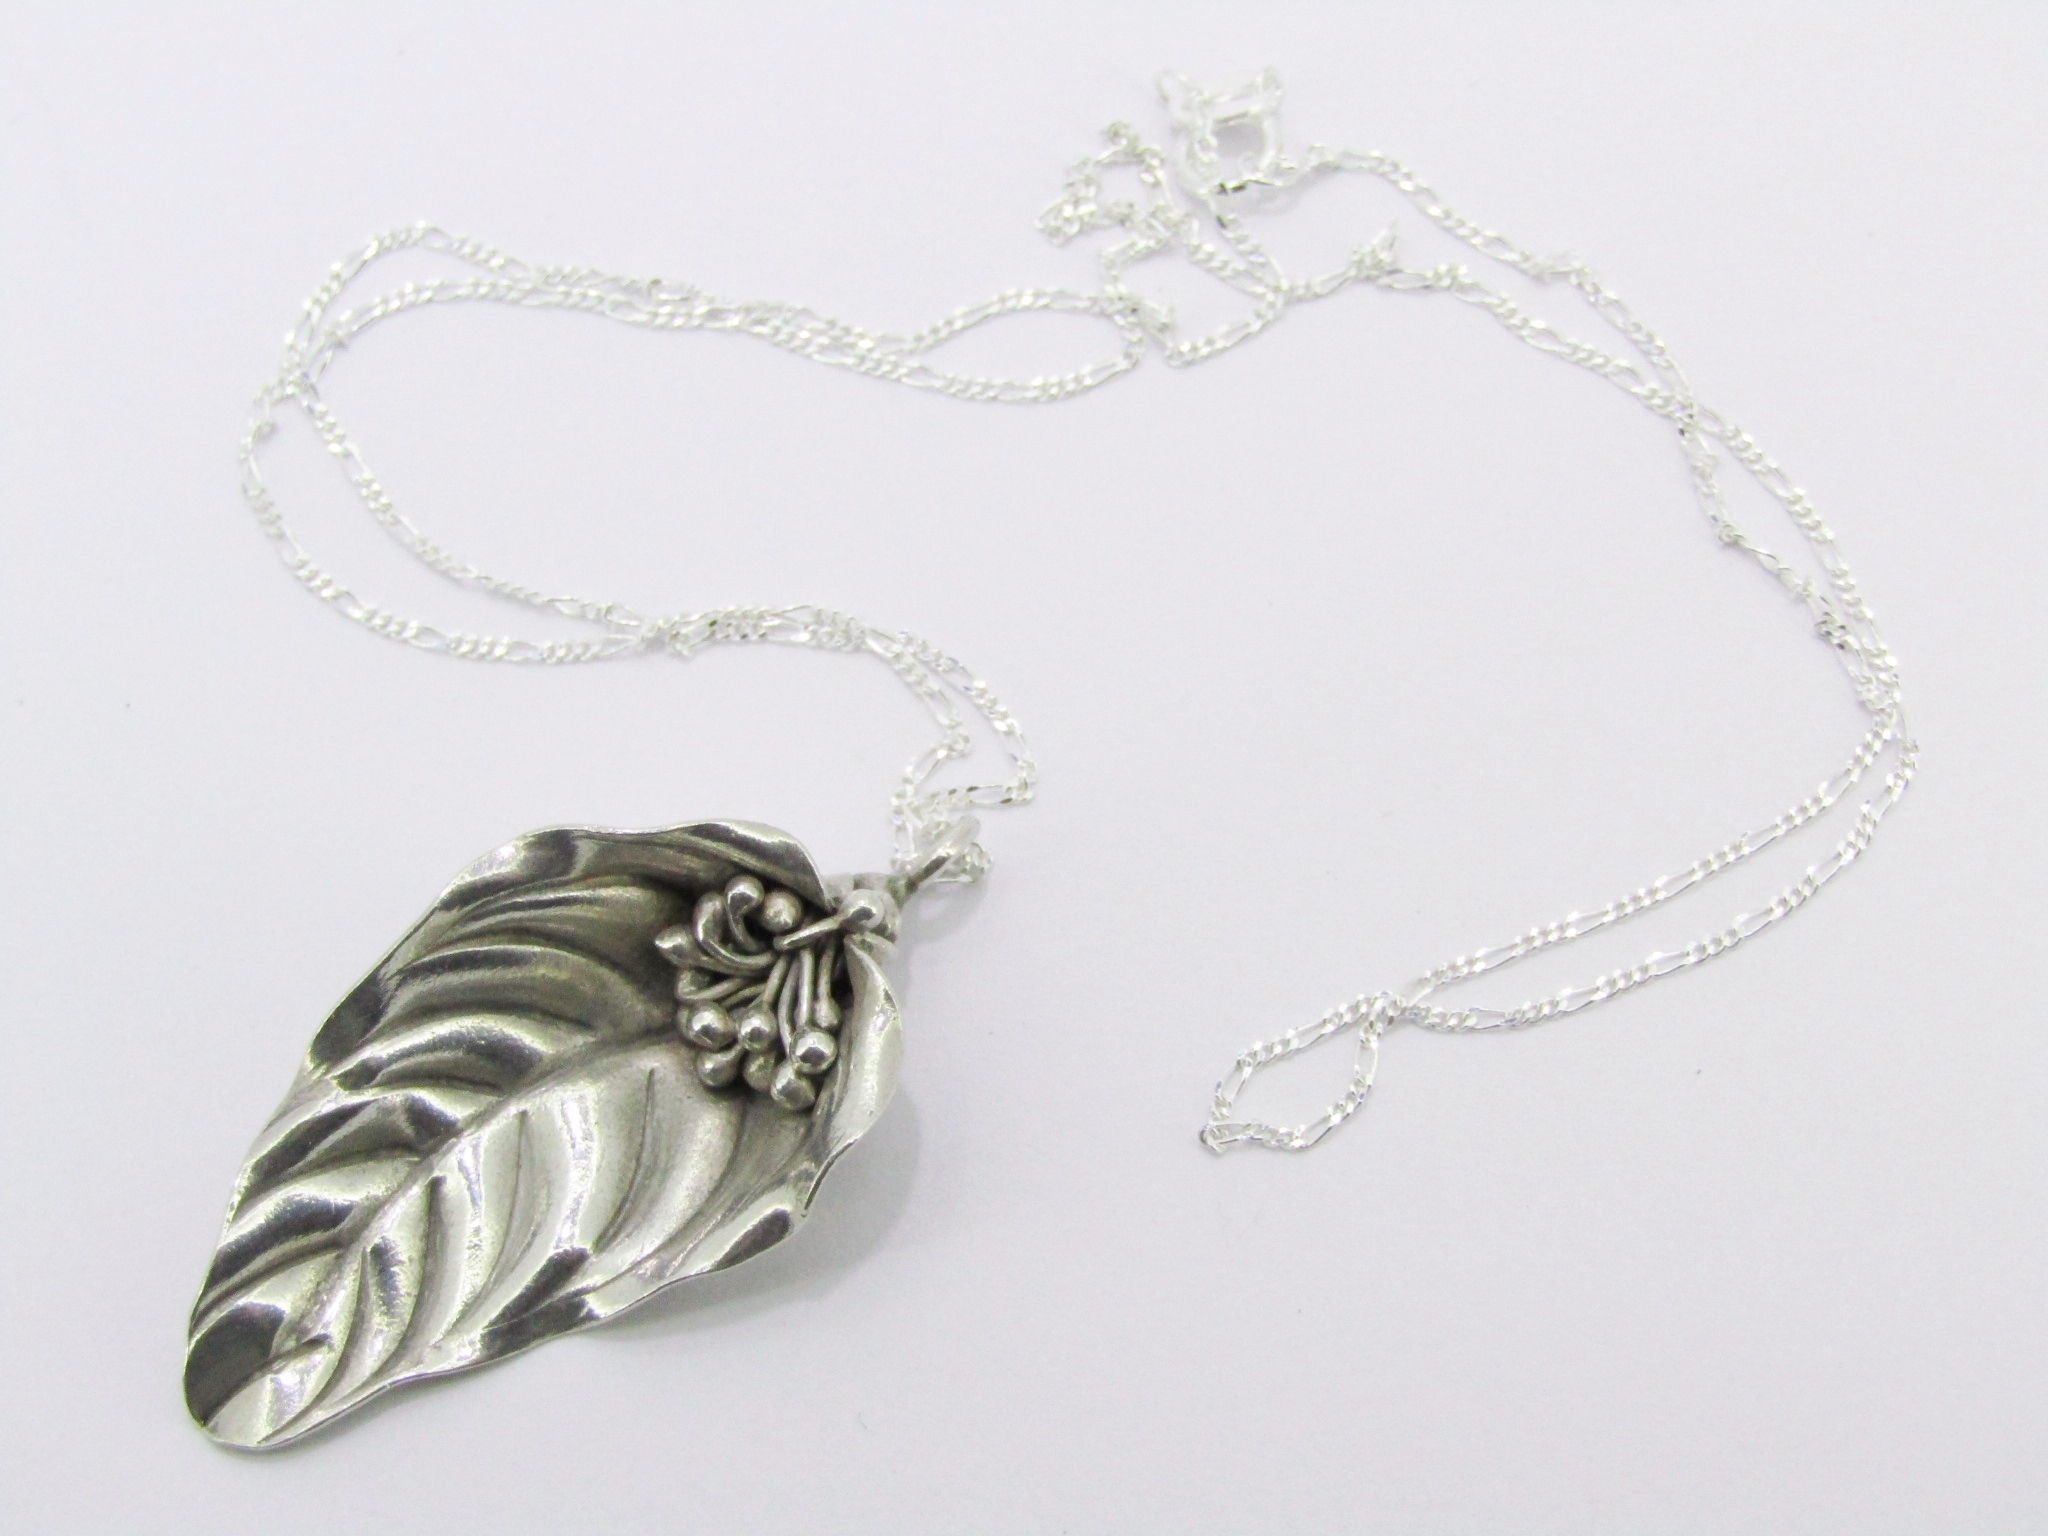 A Beautiful Handmade Leaf Design Pendant on Chain in Sterling Silver.